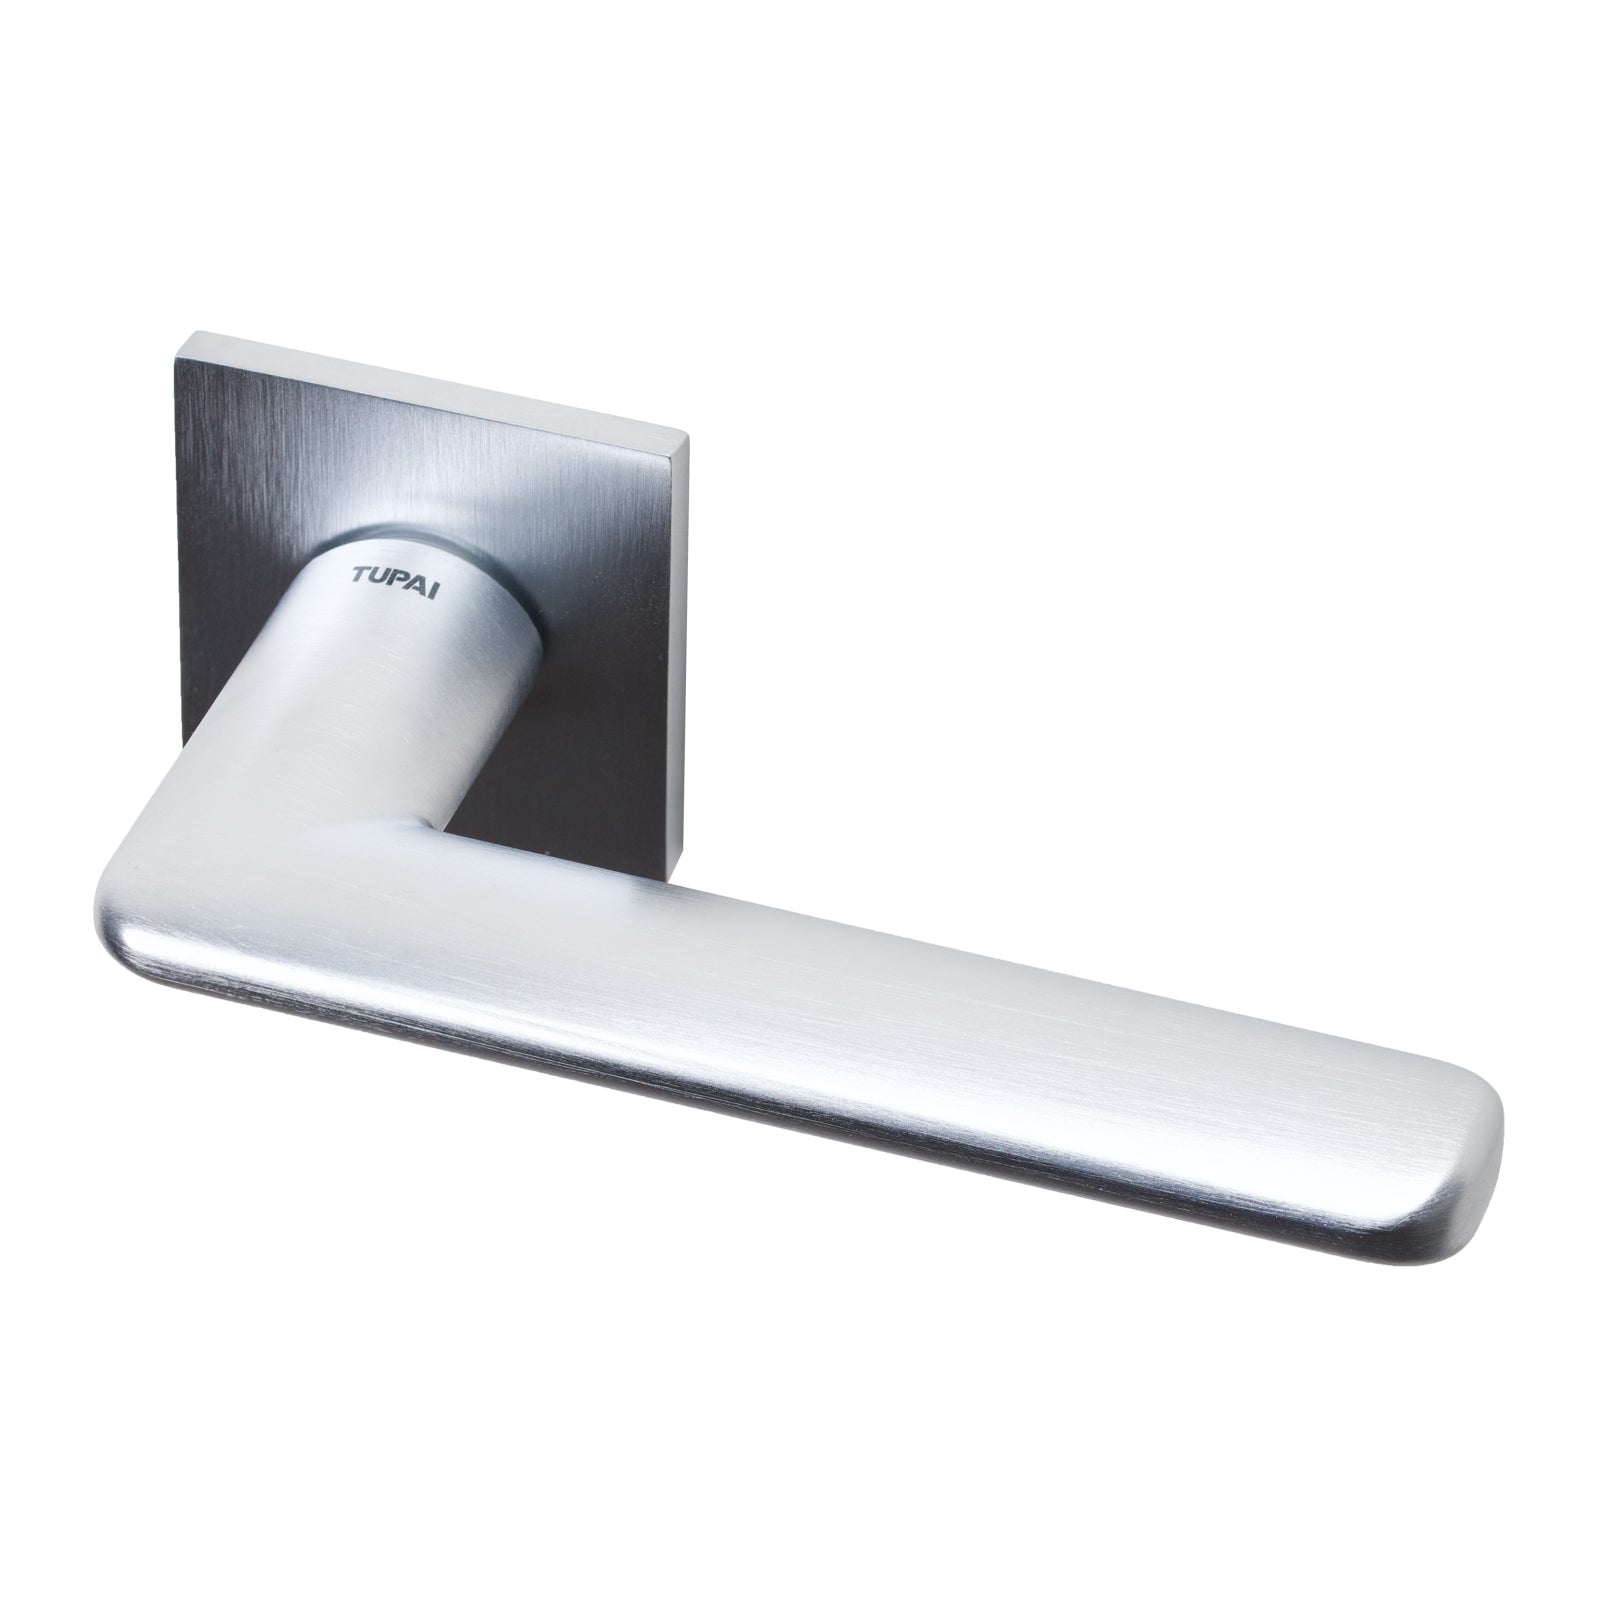 Nevosa Lever on Square Rose Door Handle in Satin Chrome Finish SHOW